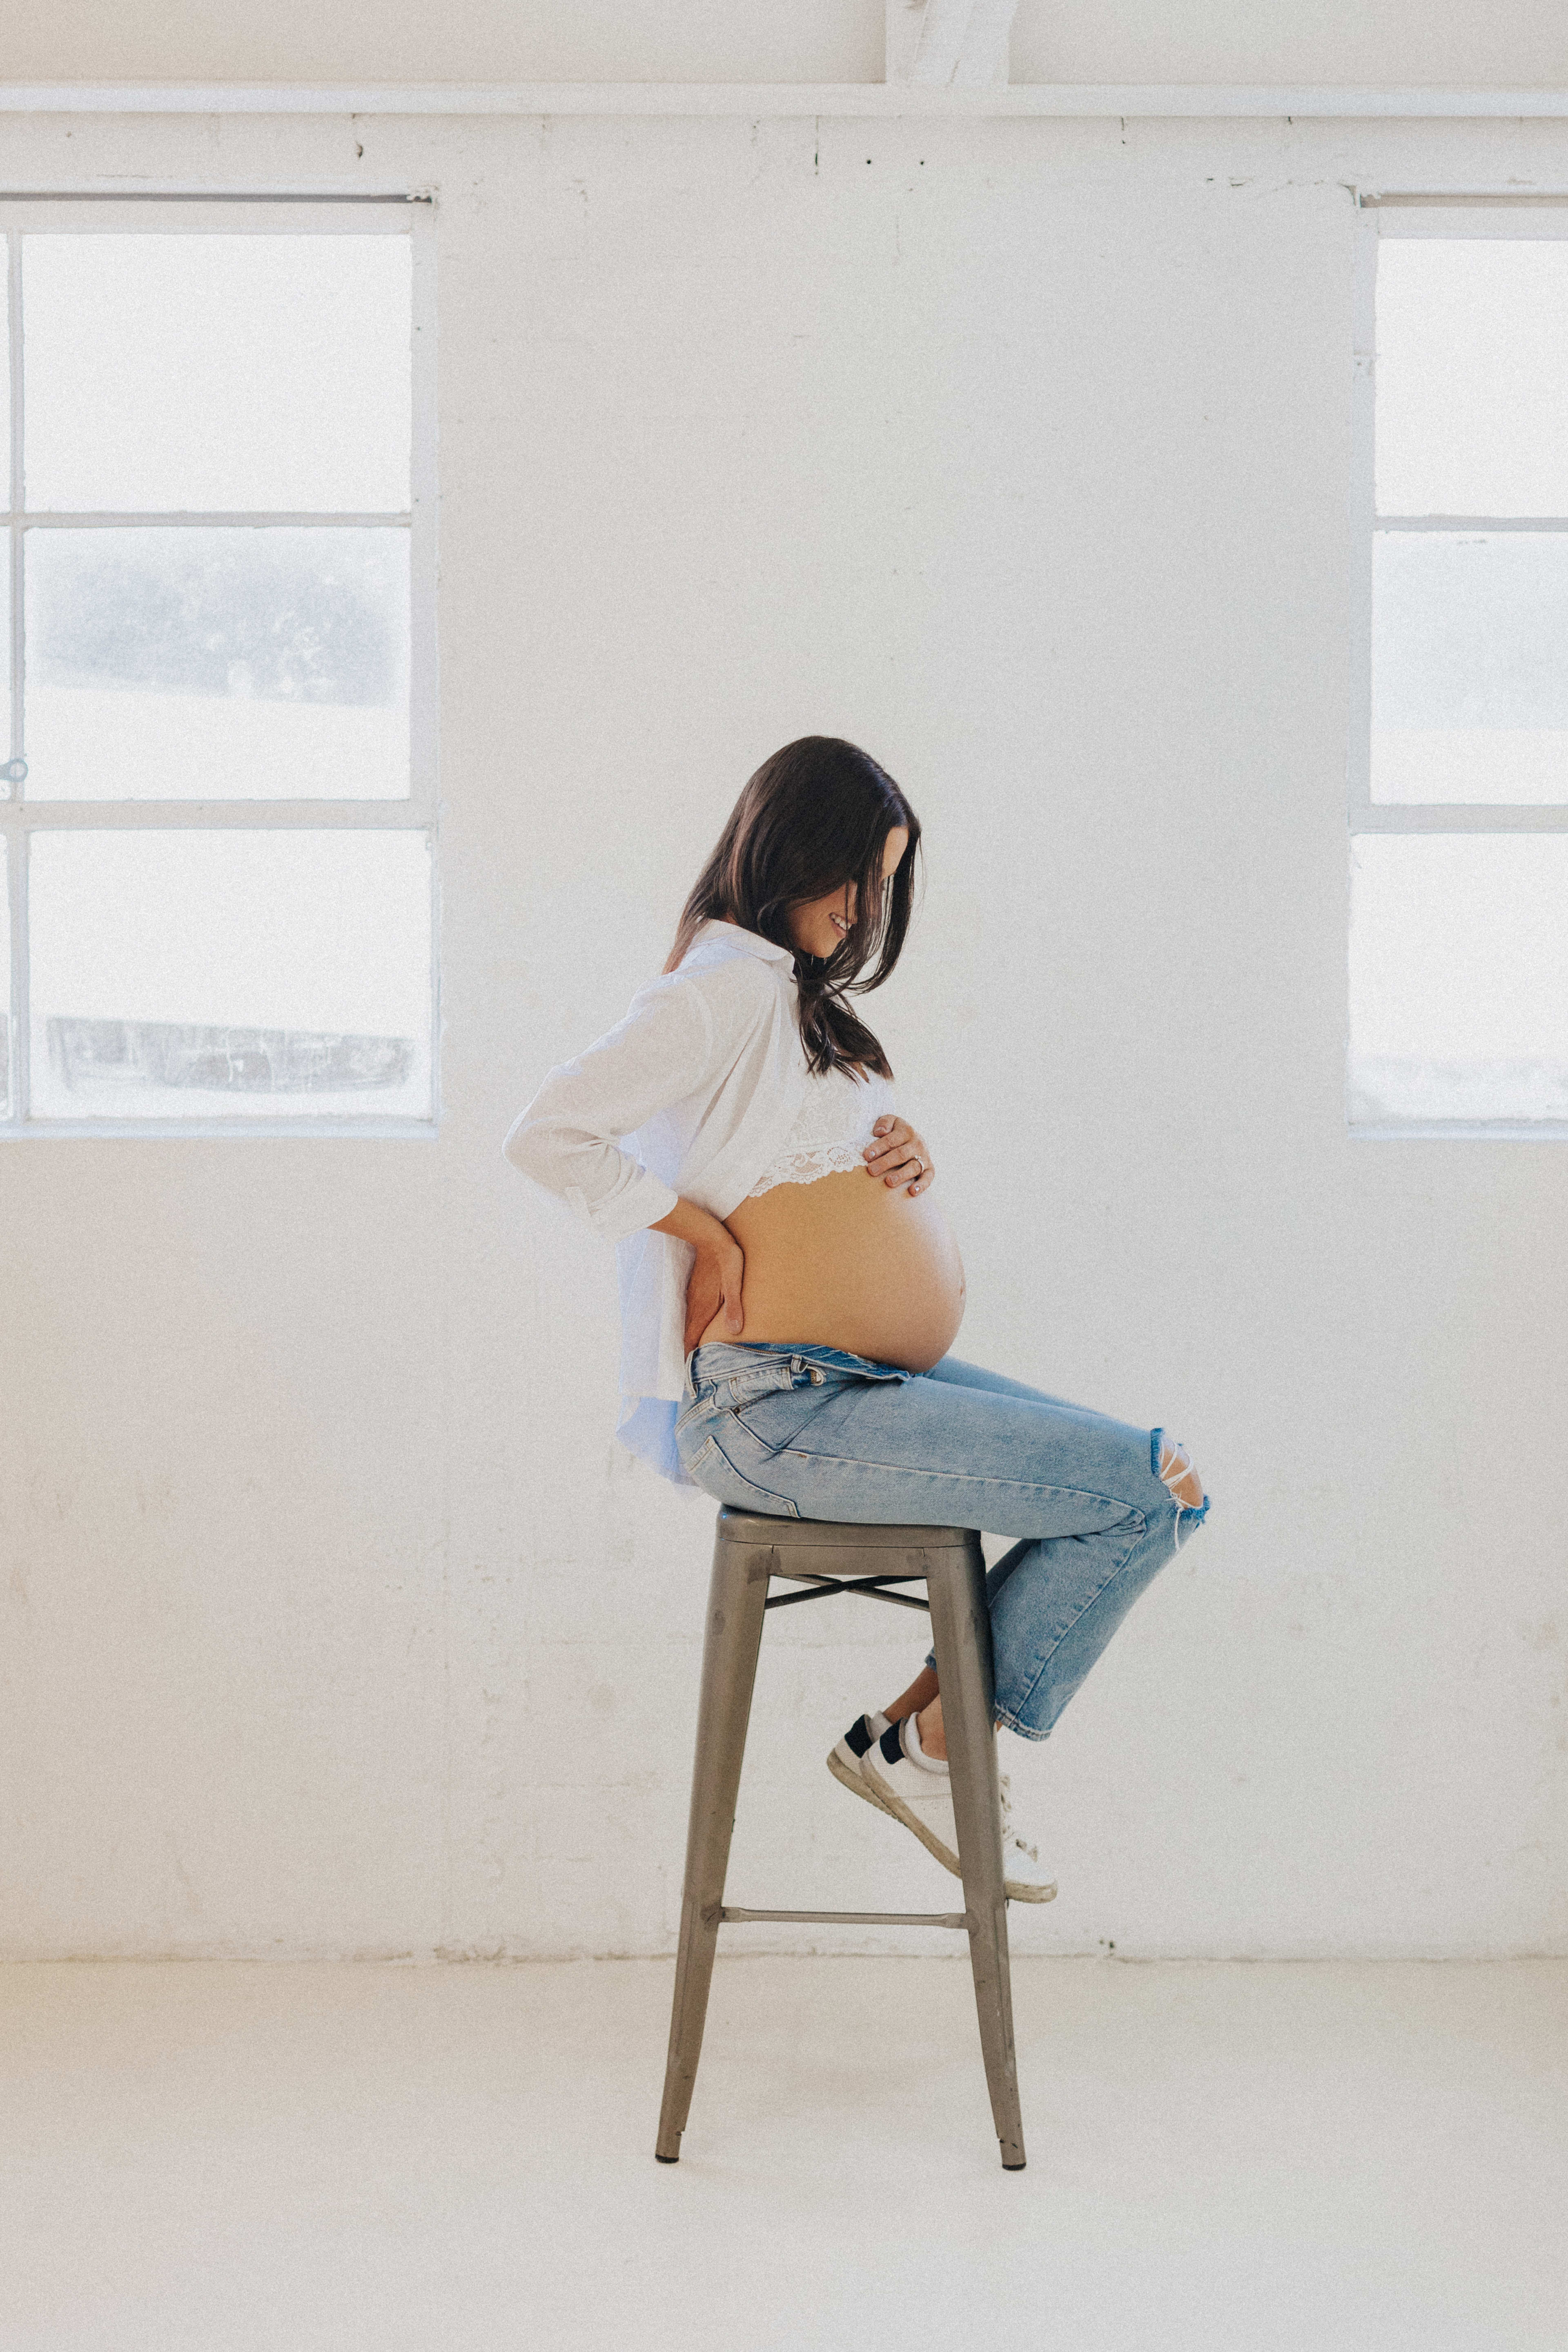 A photo shoot of a pregnant woman on a white stool with minimalistic surroundings.